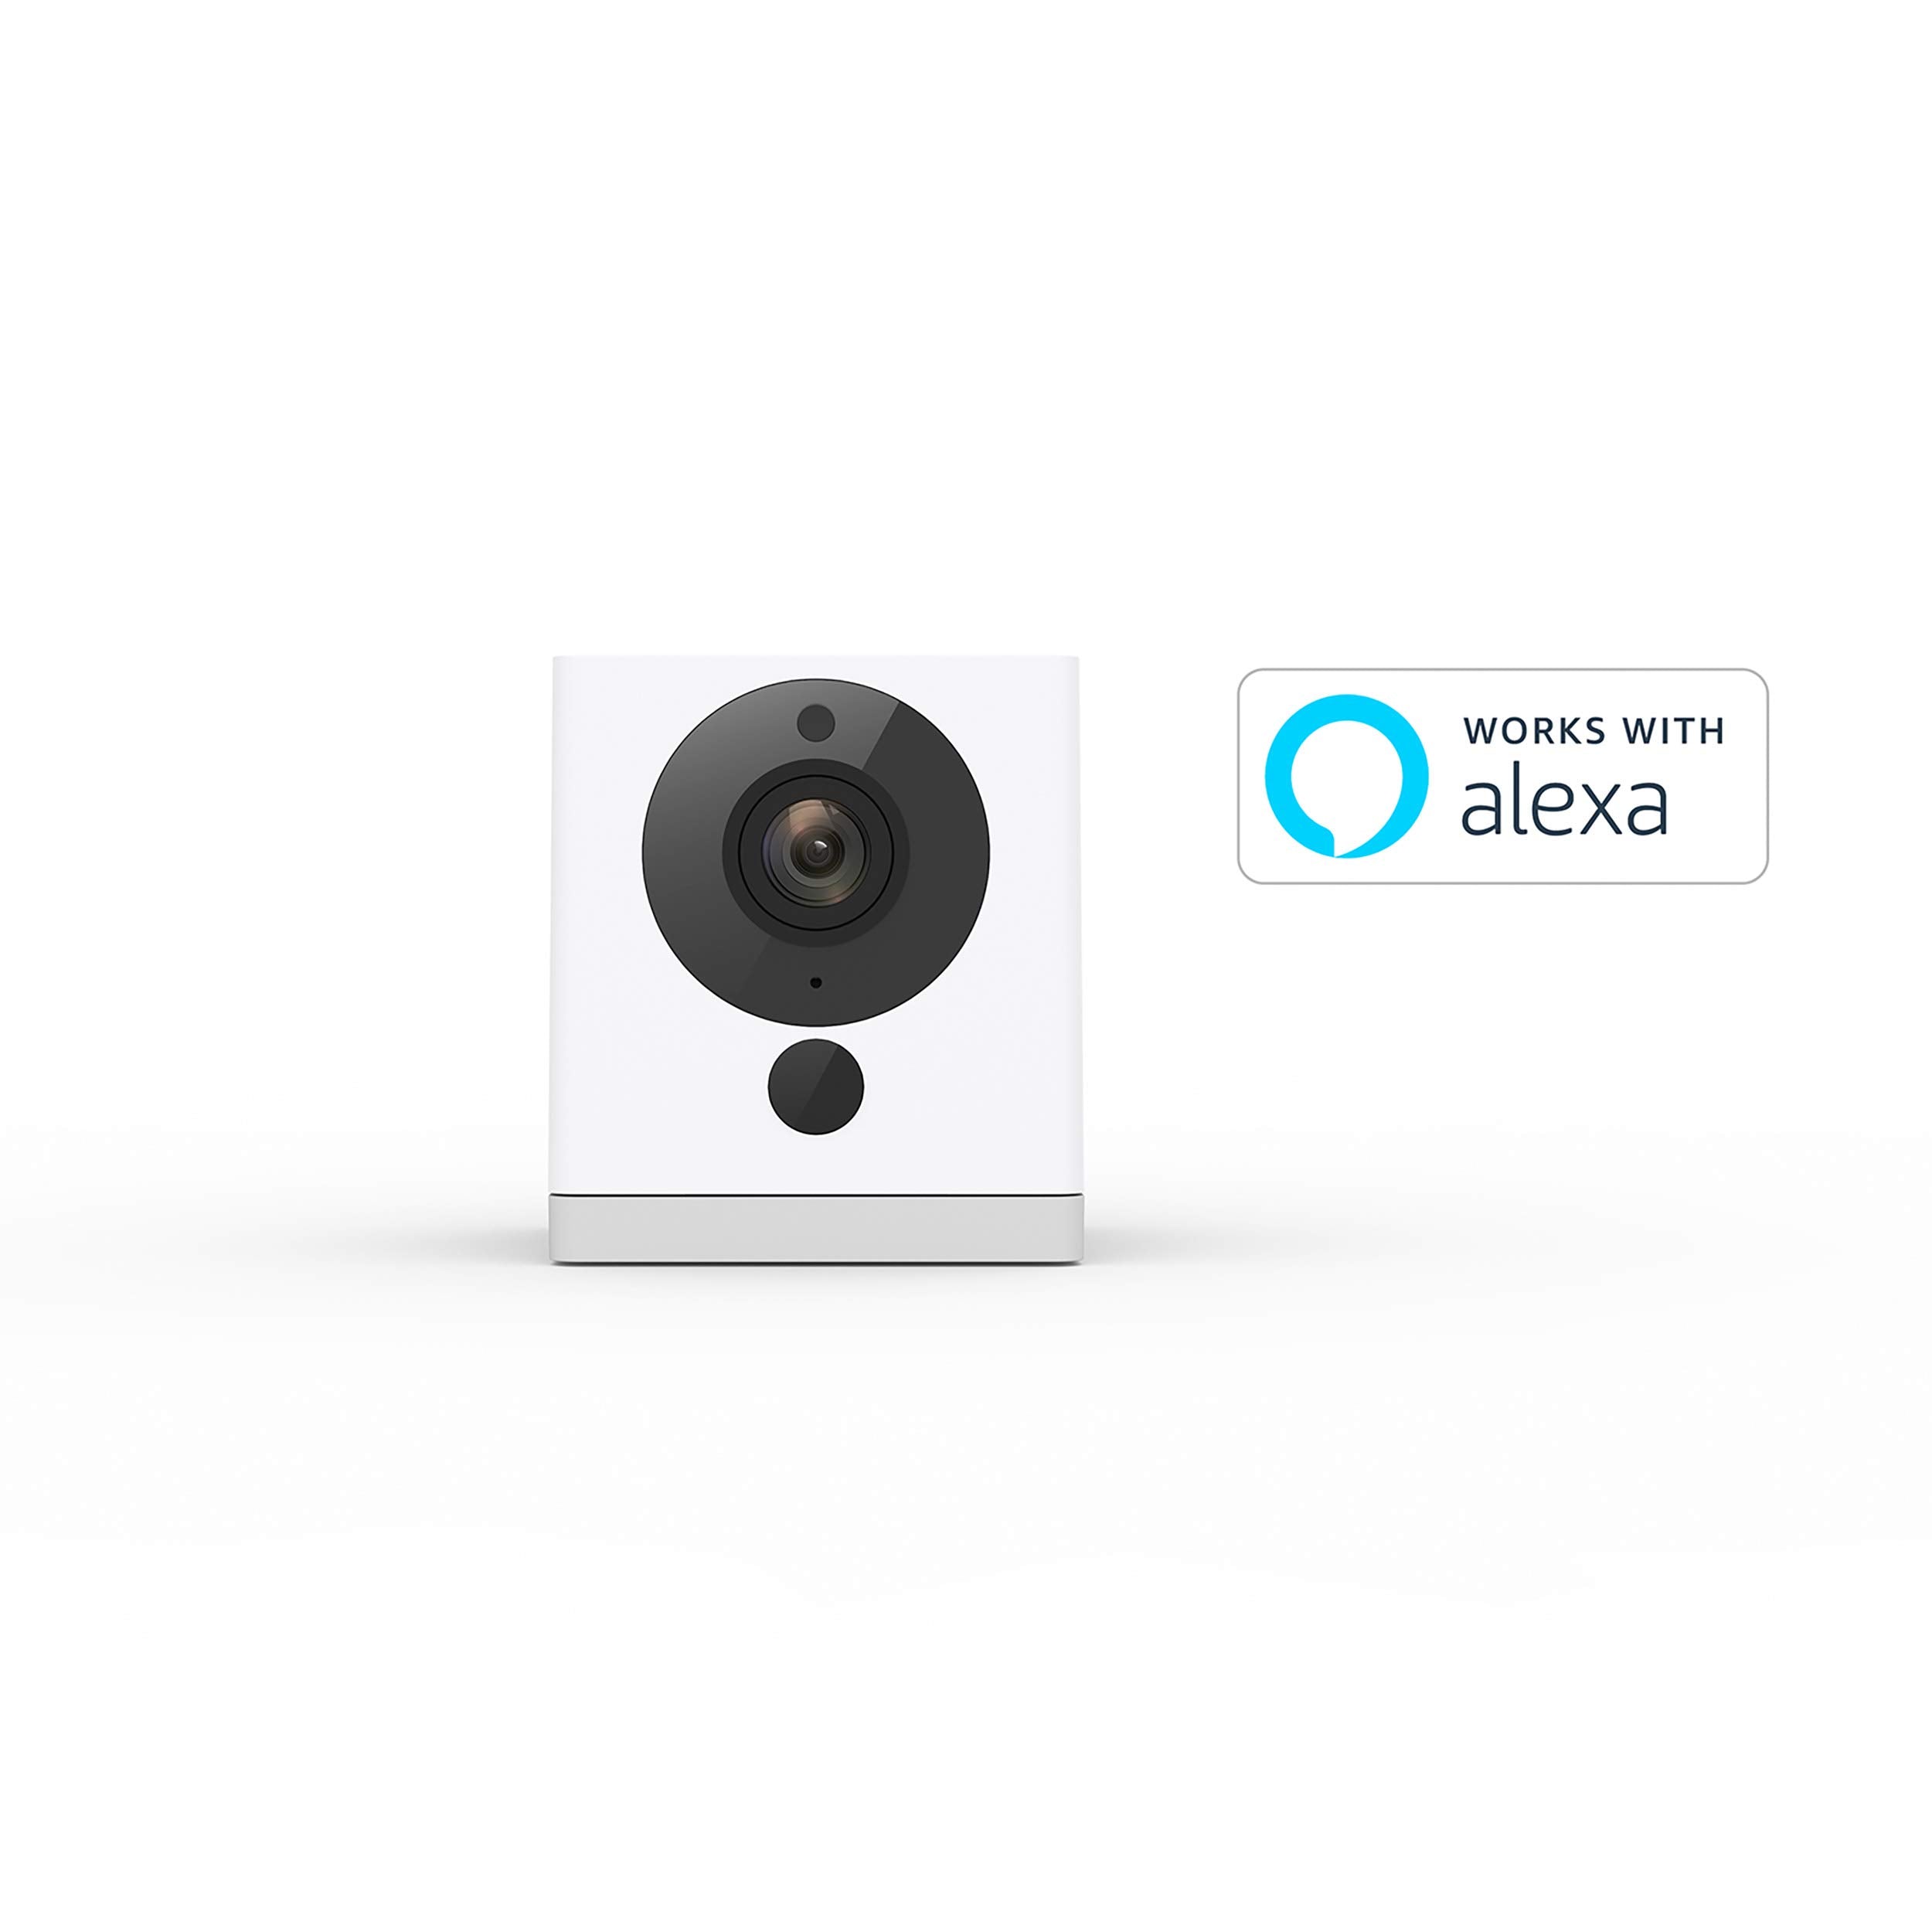 Neos SmartCam | Wi-Fi SmartHome Security Camera, Works with Alexa, 1080P HD Video, Night Vision, 2-Way Audio, Free Cloud Storage, UK Support, White, Single Pack